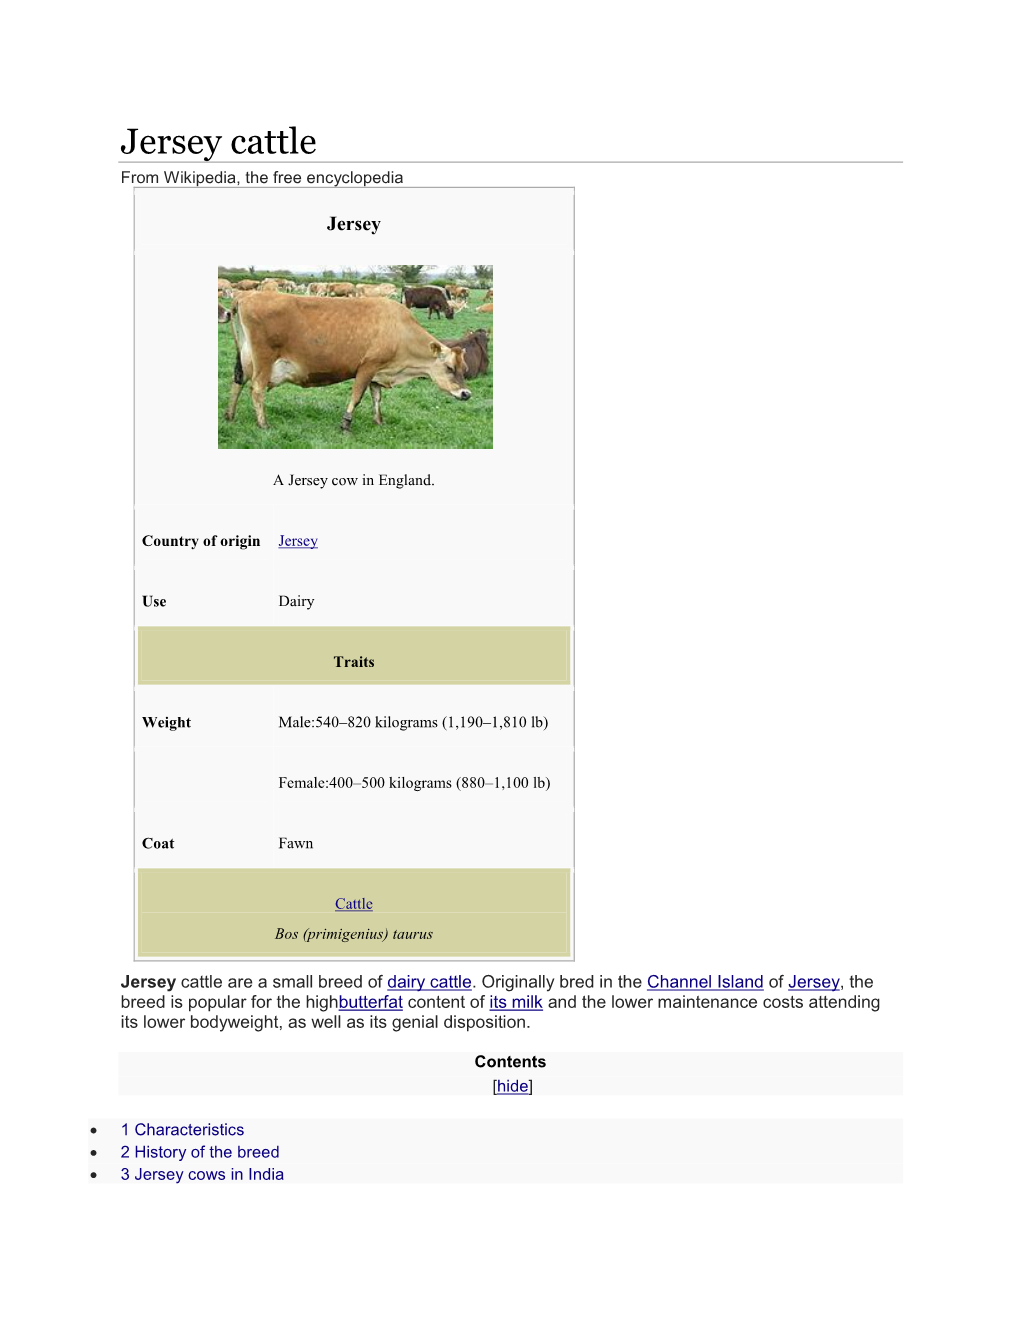 Jersey Cattle from Wikipedia, the Free Encyclopedia